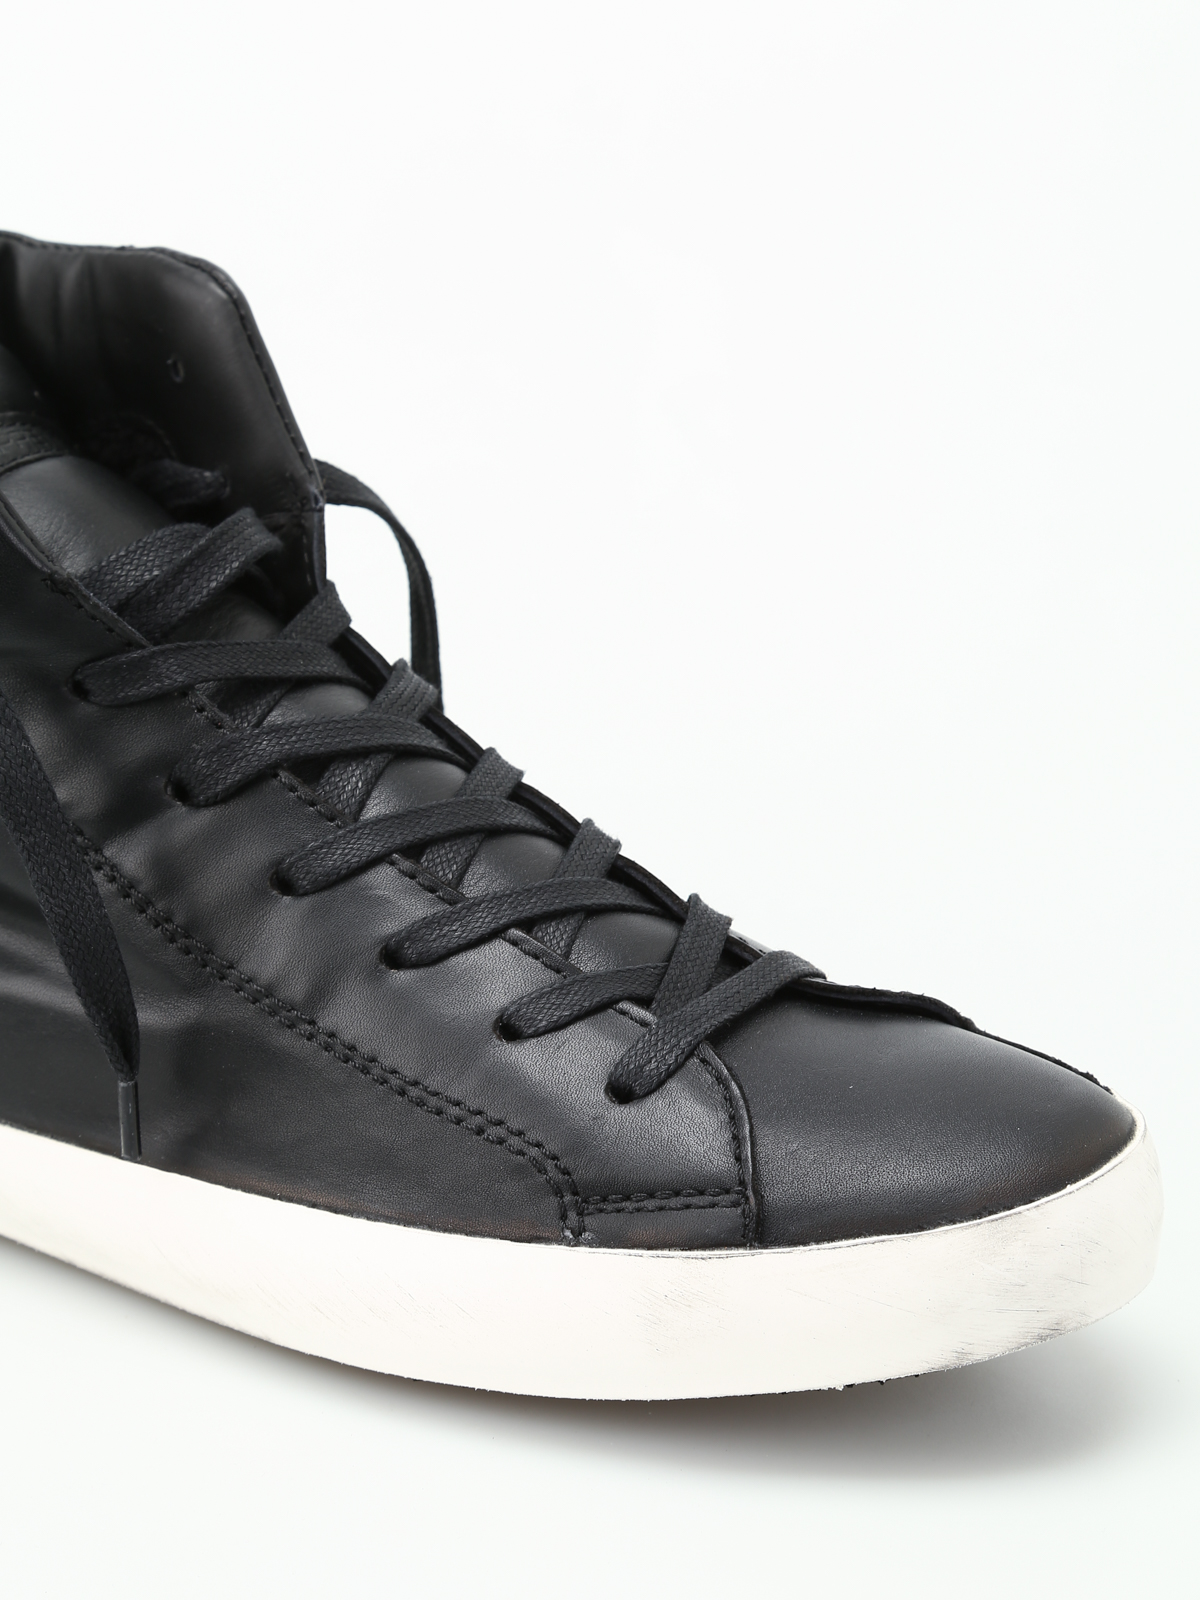 Trainers Philippe Model - Paris black high top sneakers - CLHUFV02